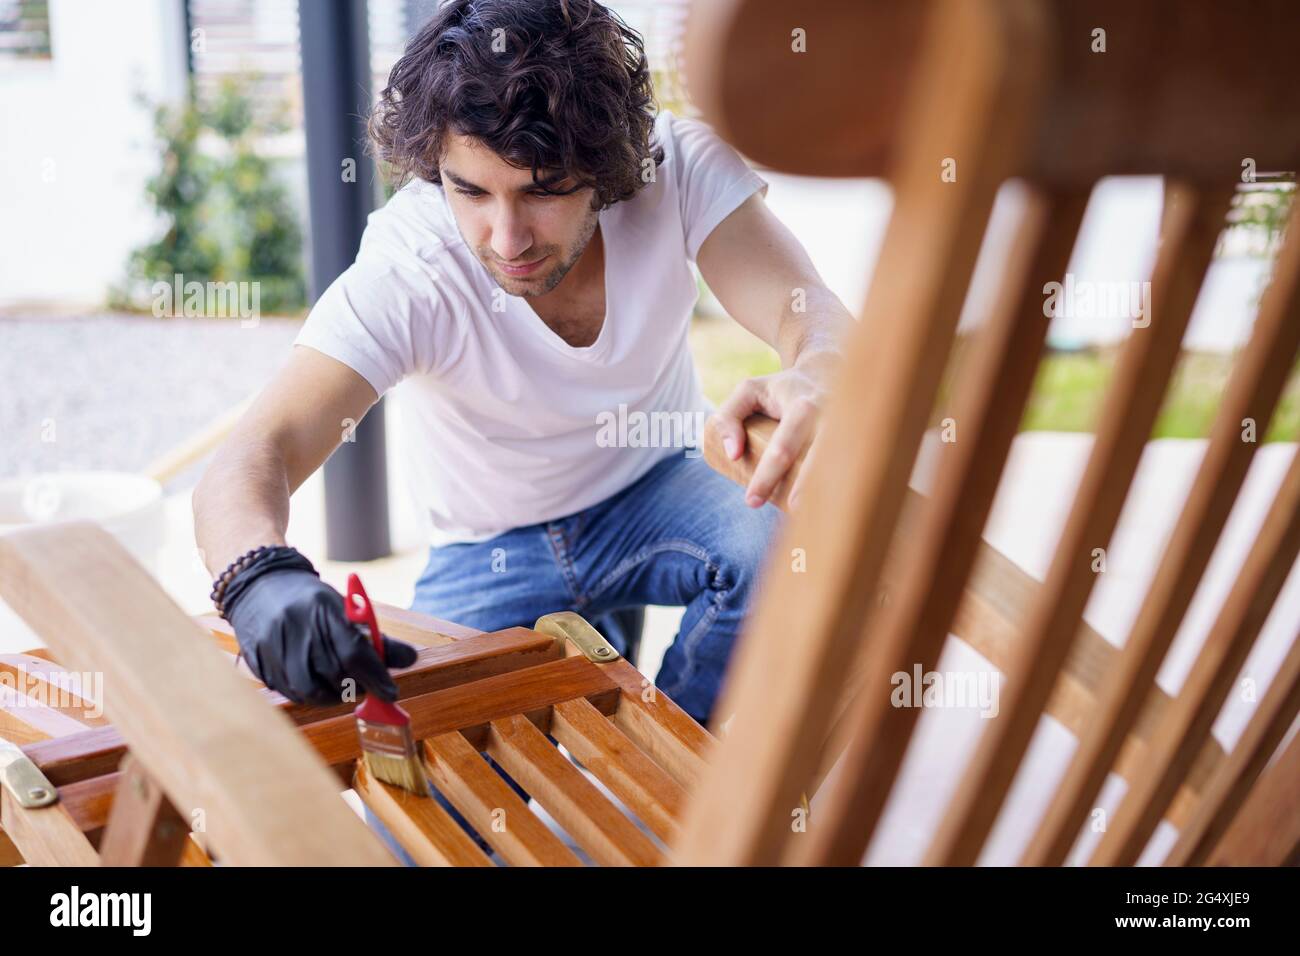 Mid adult man painting wooden deck chair Stock Photo